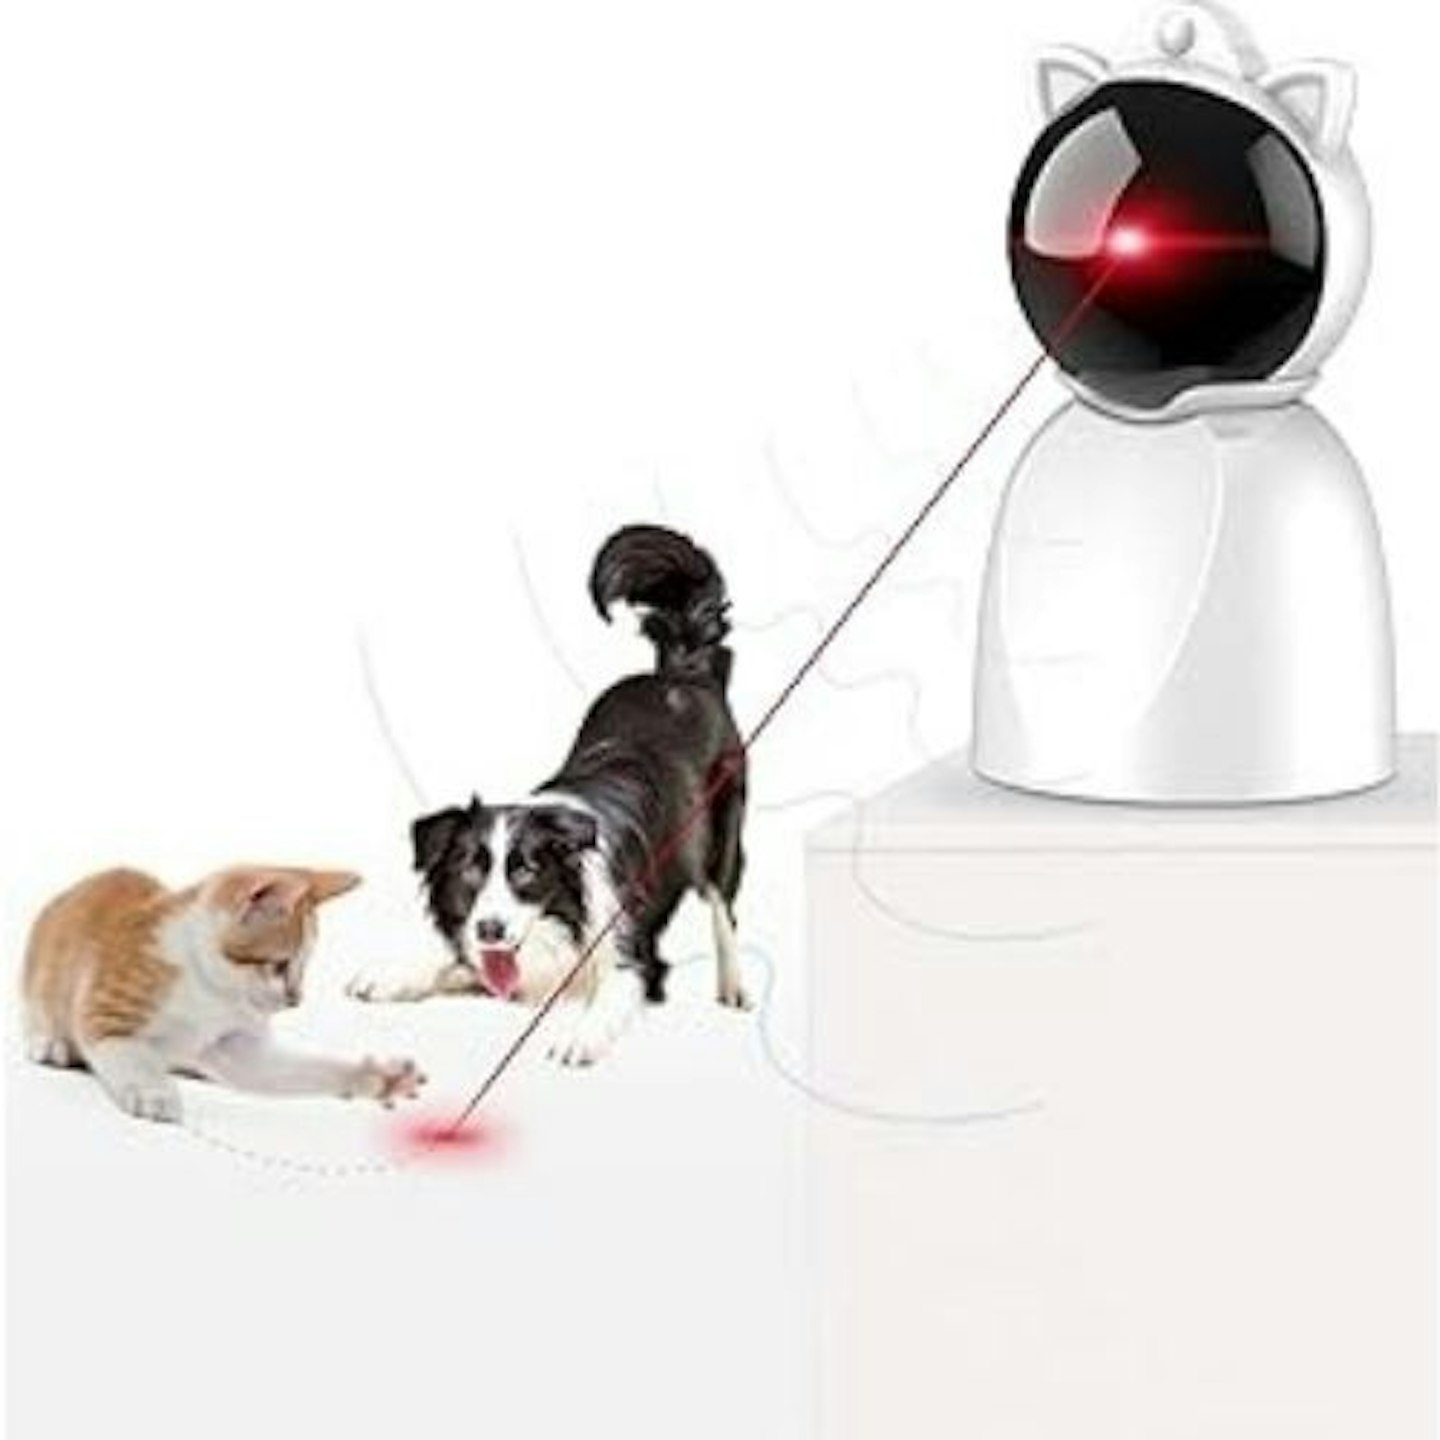 Best Cat Laser Toys For Indoor Play